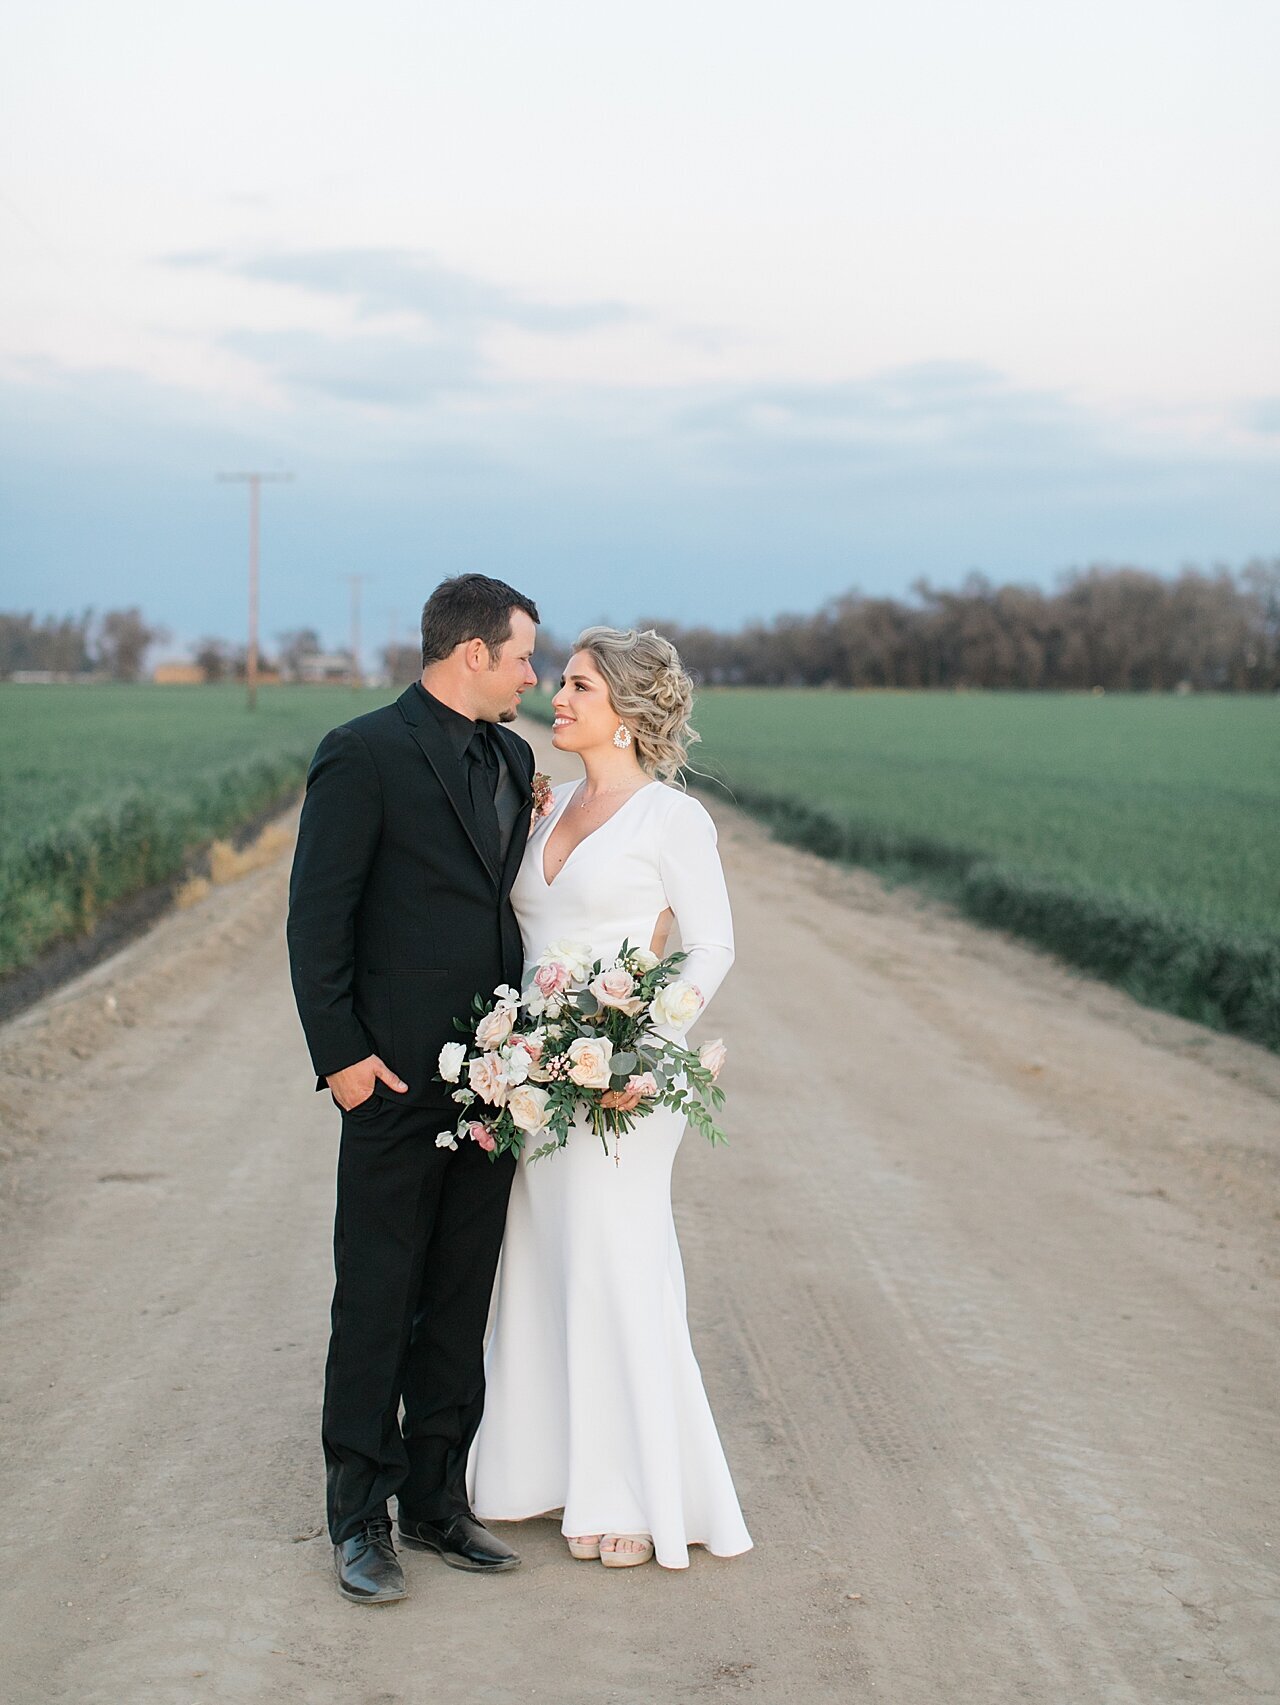 Emerald grace floral design wedding with Lauren Westra photography almond orchard bride and groom soft blush color palette central california weddings_2518